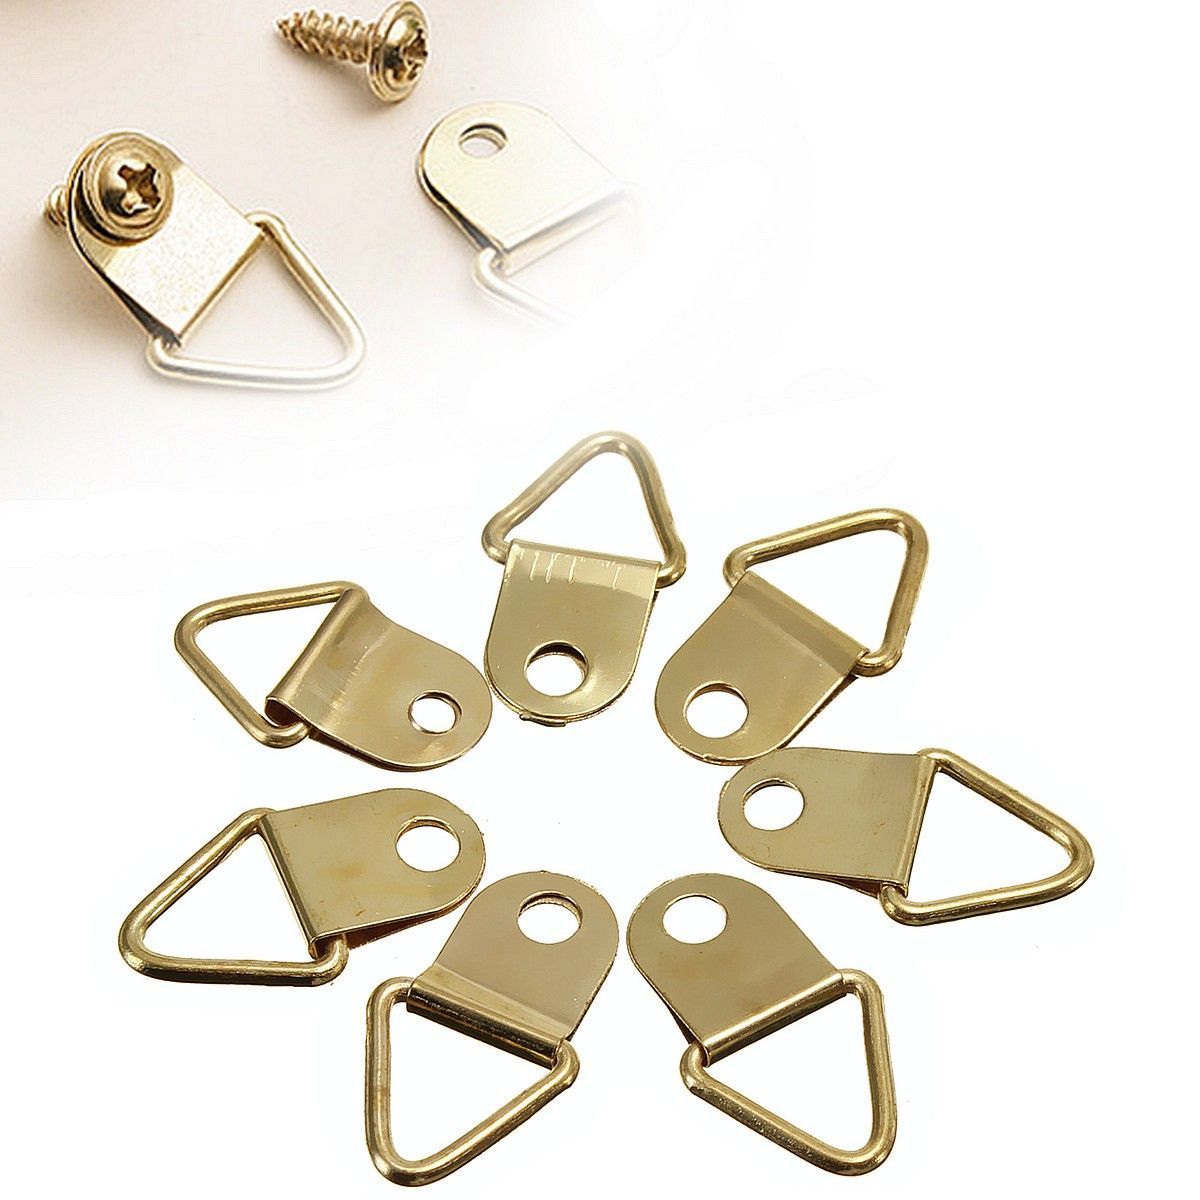 50Pcs-Copper-Triangle-Photo-Picture-Frame-Wall-Mount-Hook-Hanger-Ring-1033984